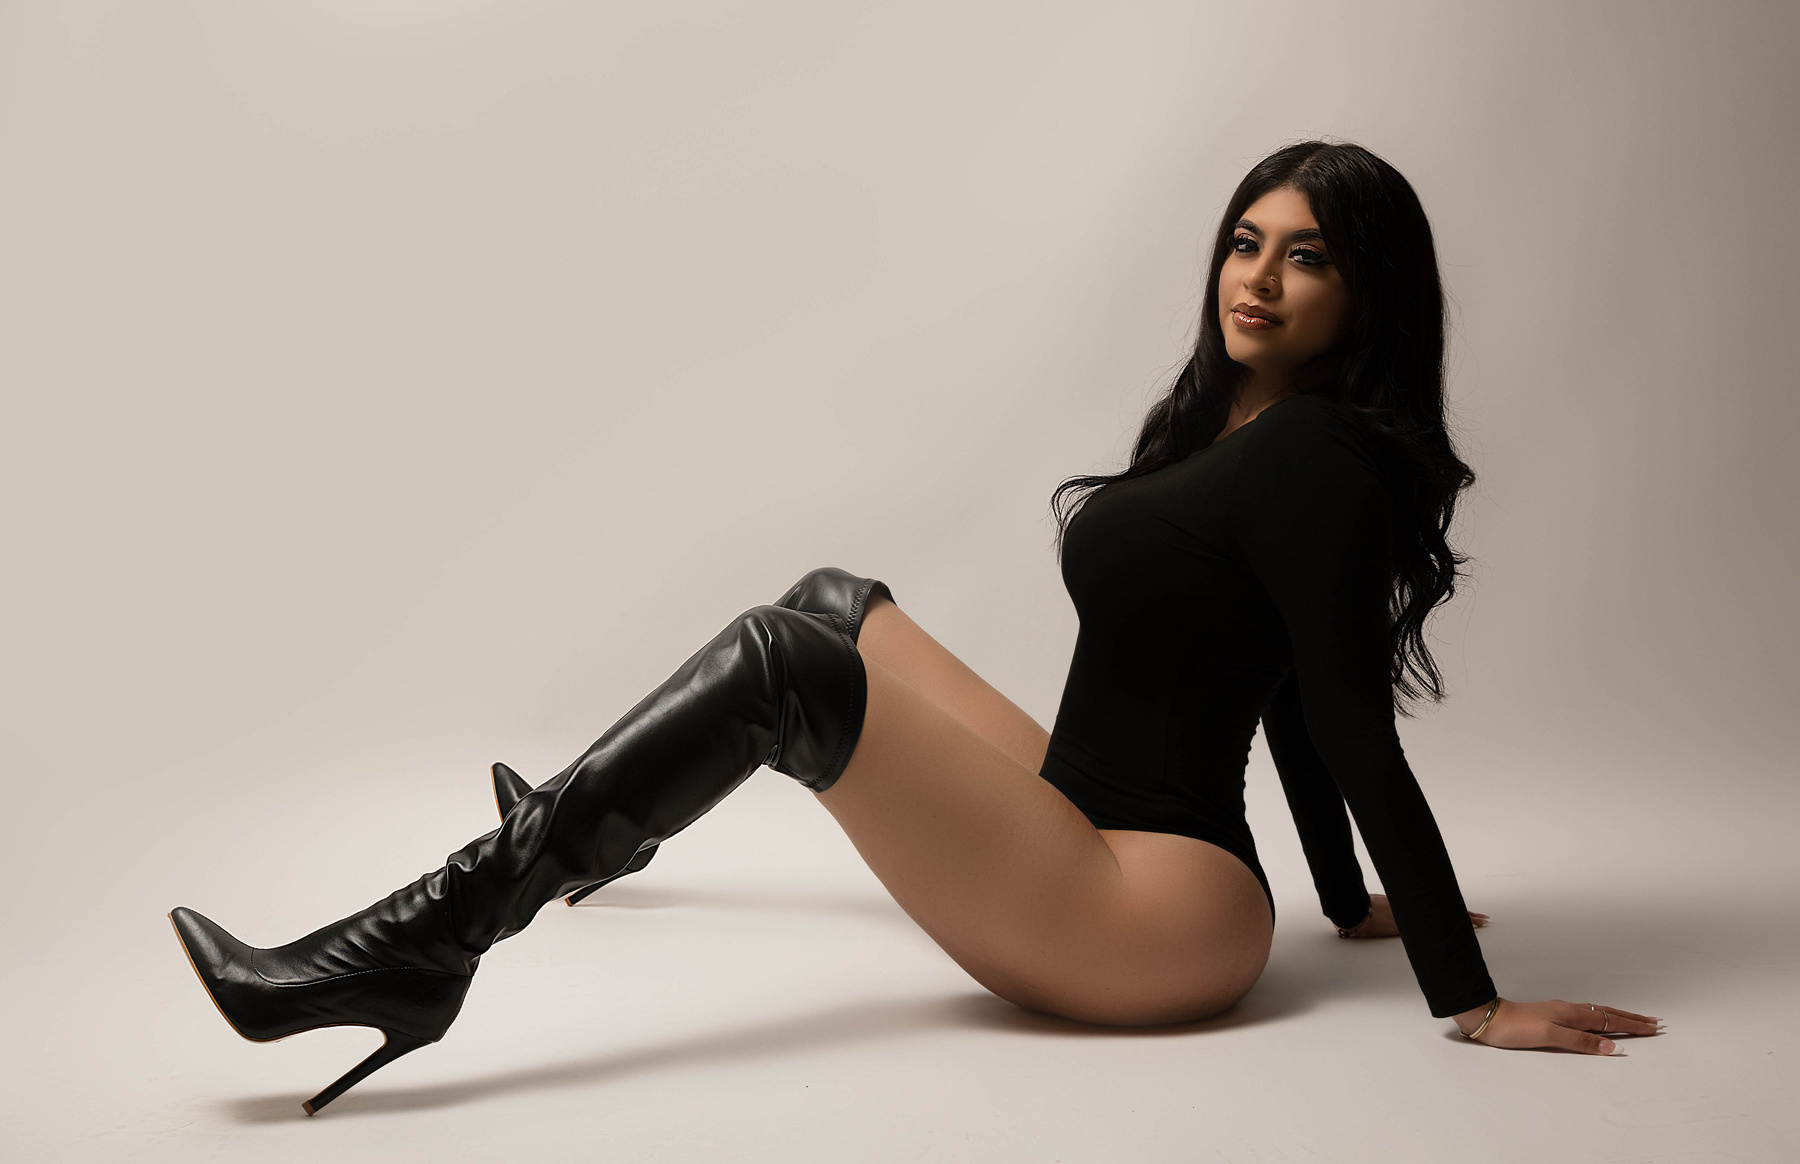 adult birthday photoshoot taken by Aly incardona who is an award winning photographer in the Central Valley California based out of modesto . This shoot was taken wearing a black bodysuit, black long high boots and black hair with high end retouchin